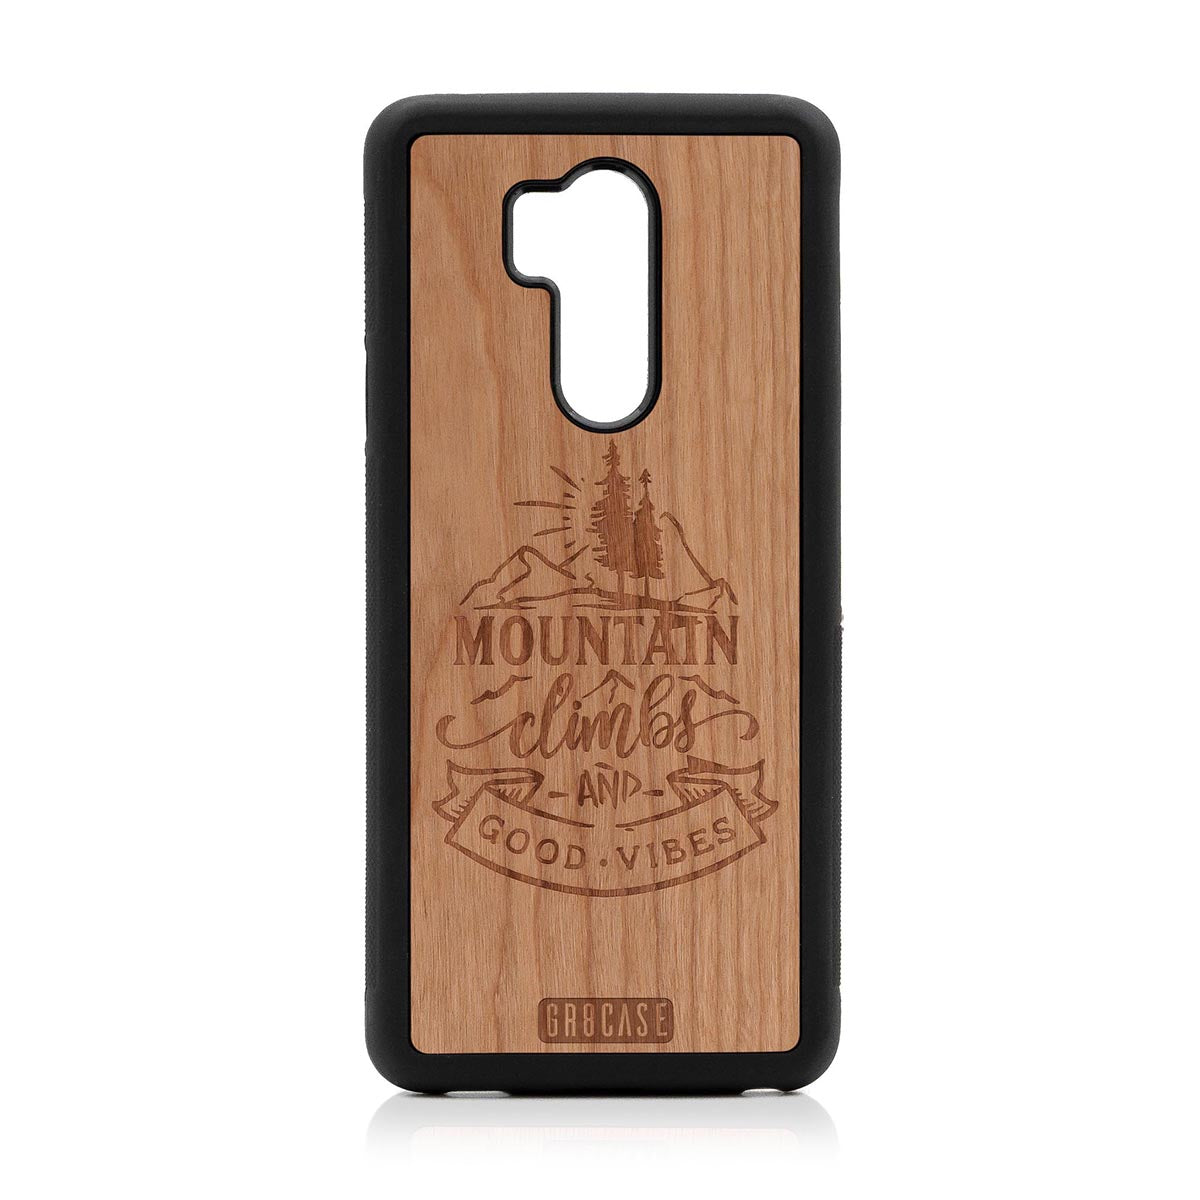 Mountain Climbs And Good Vibes Design Wood Case LG G7 ThinQ by GR8CASE